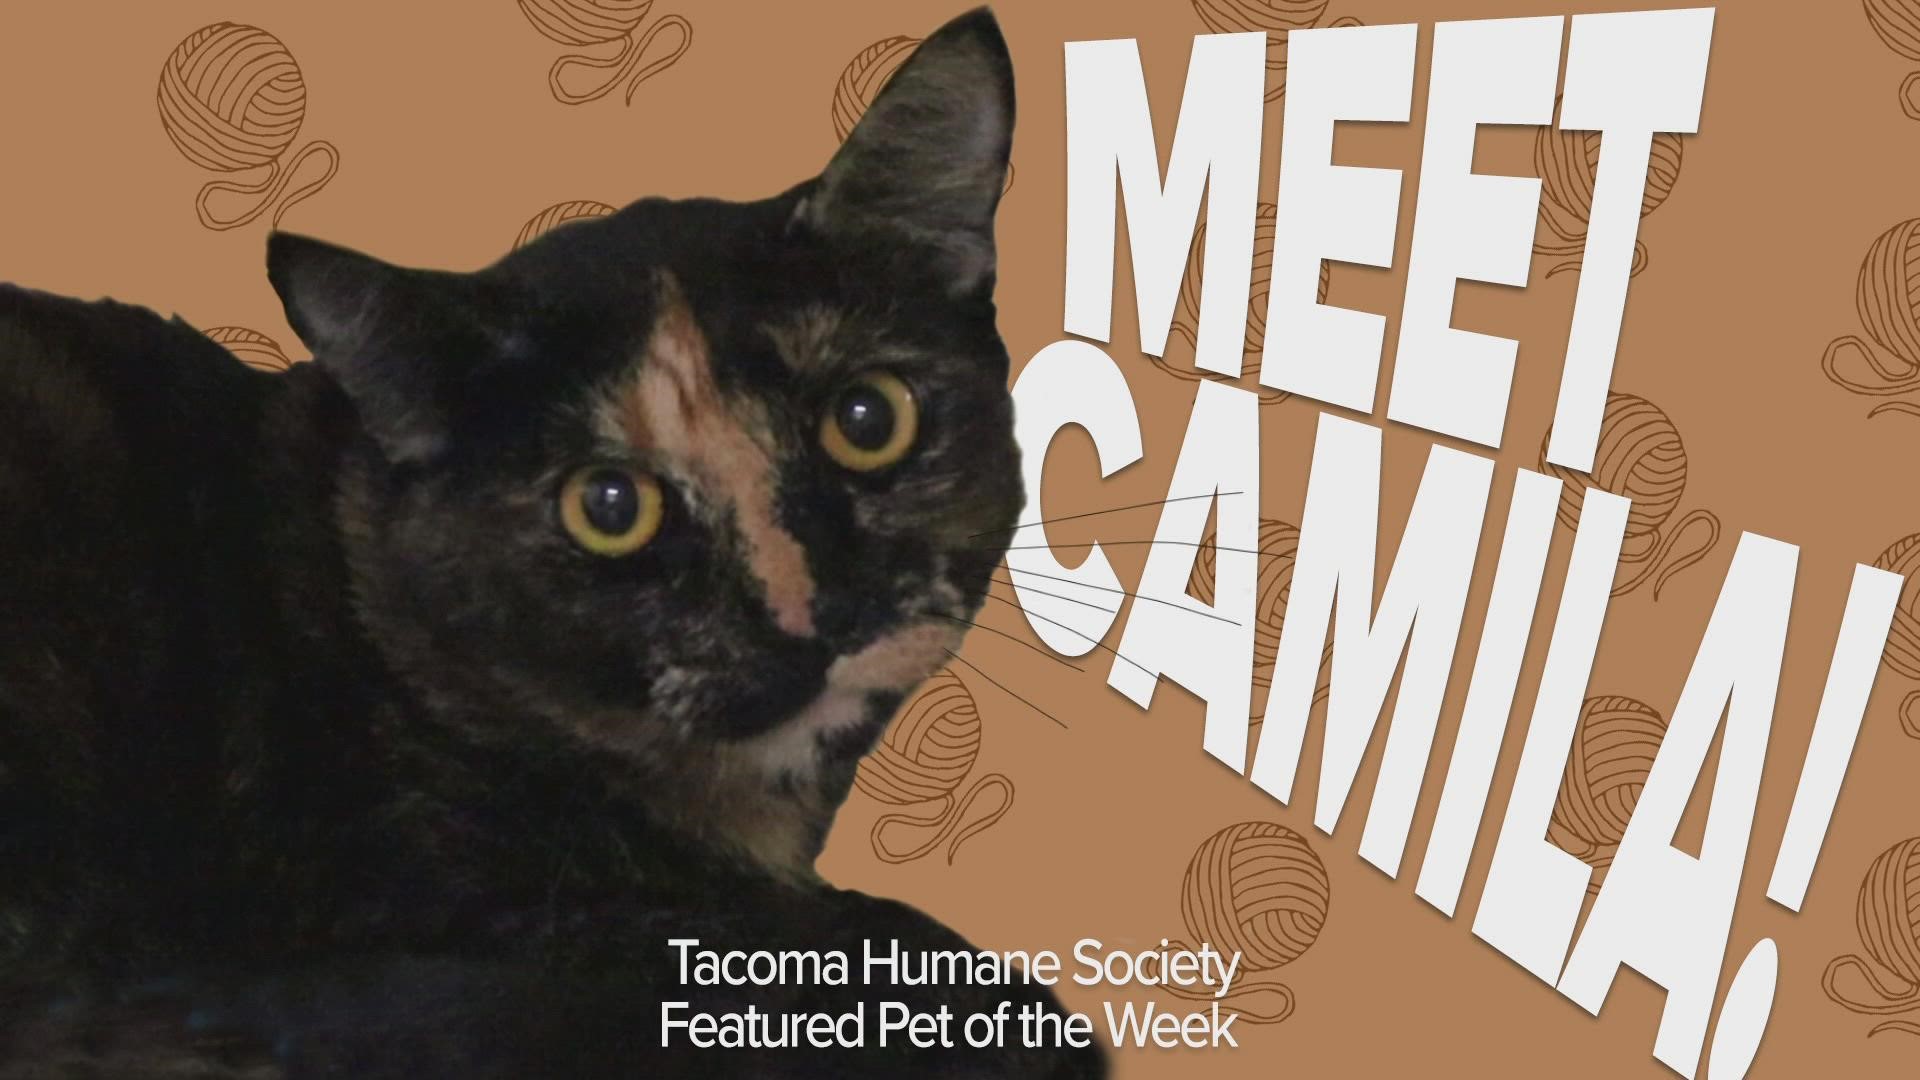 This week's featured adoptable pet is Camila!